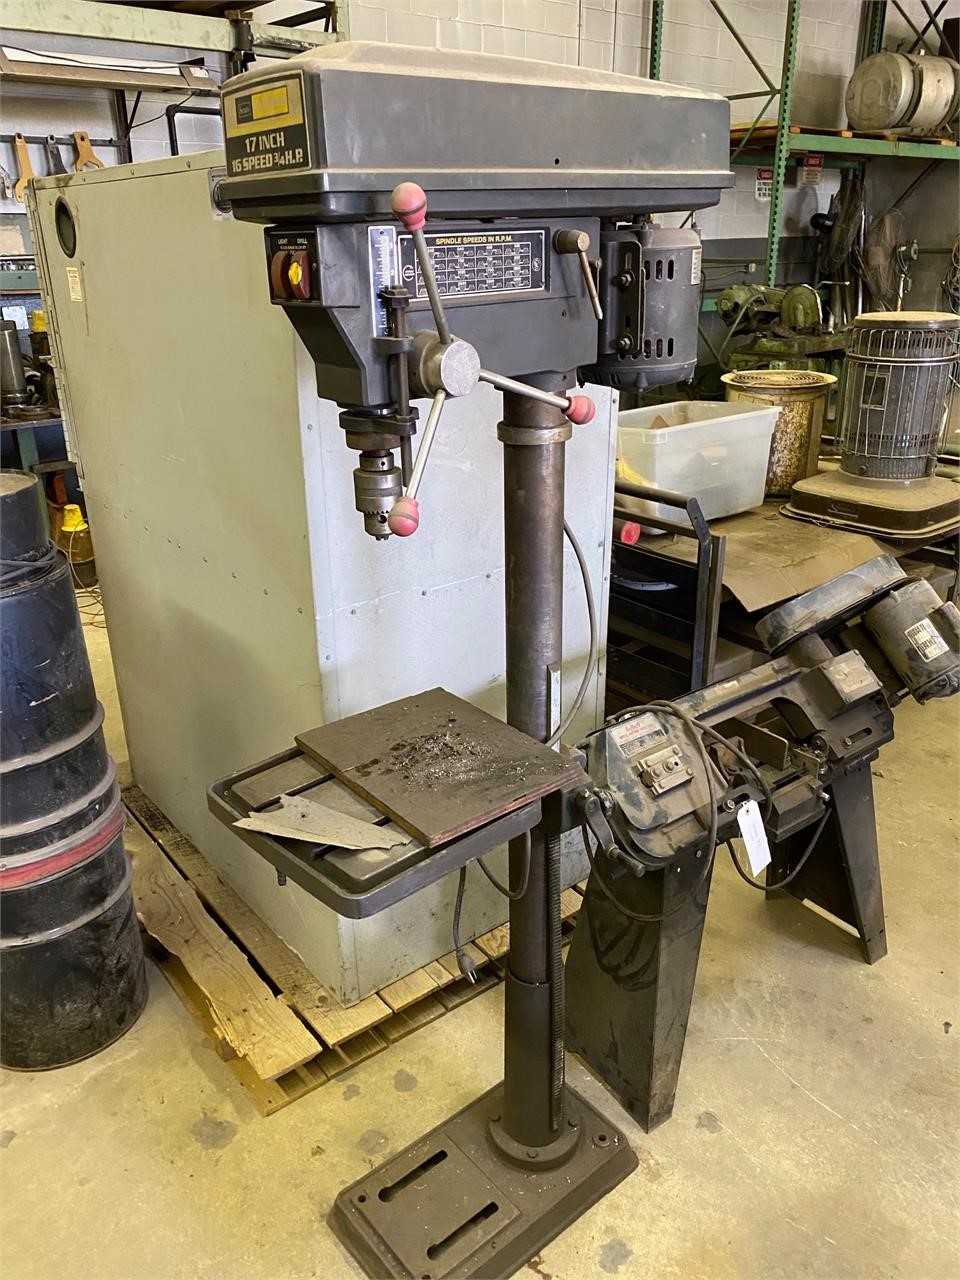 BANDSAW AND DRILL PRESS